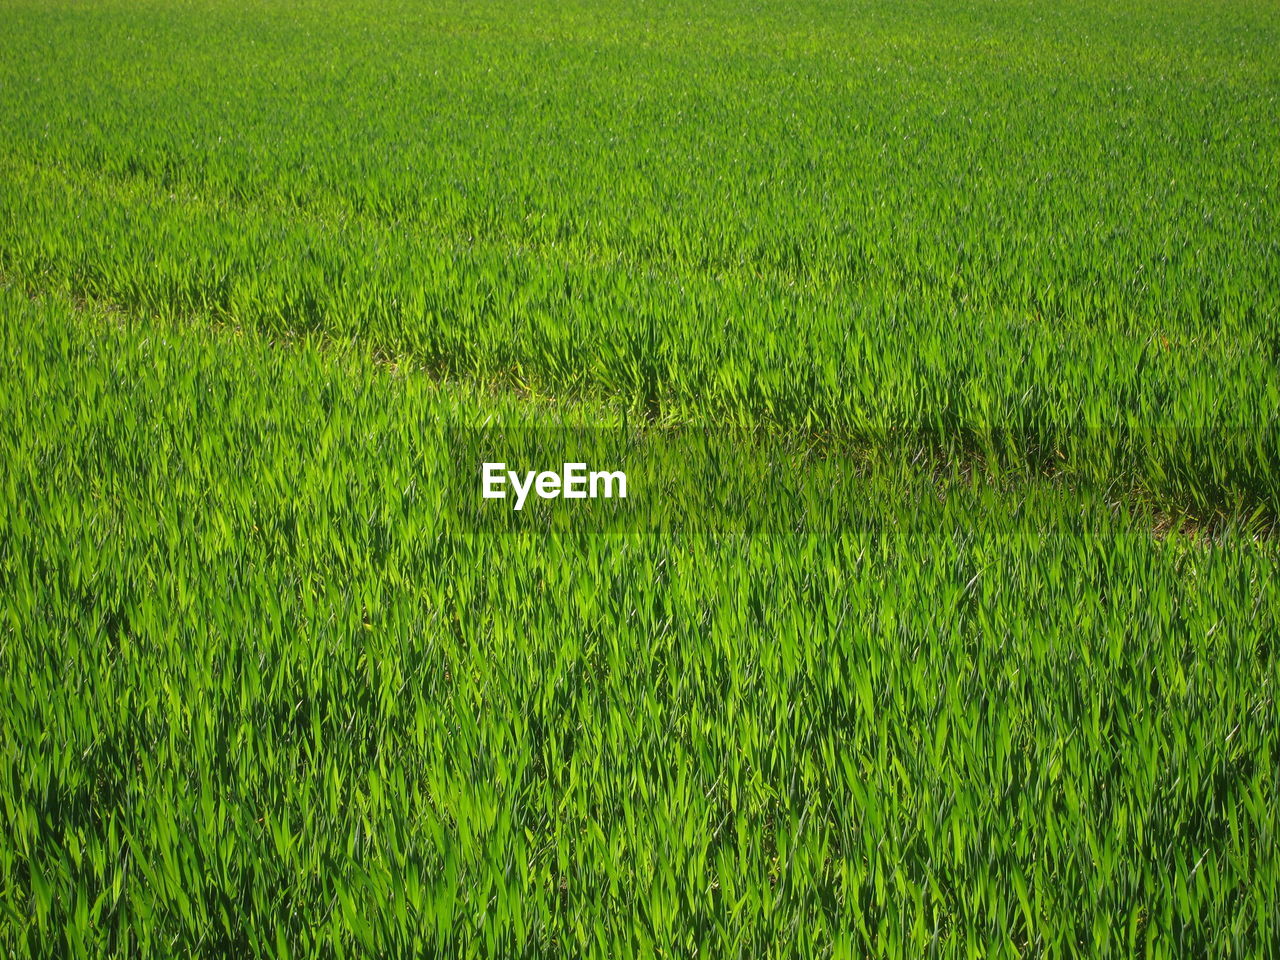 SCENIC VIEW OF RICE PADDY